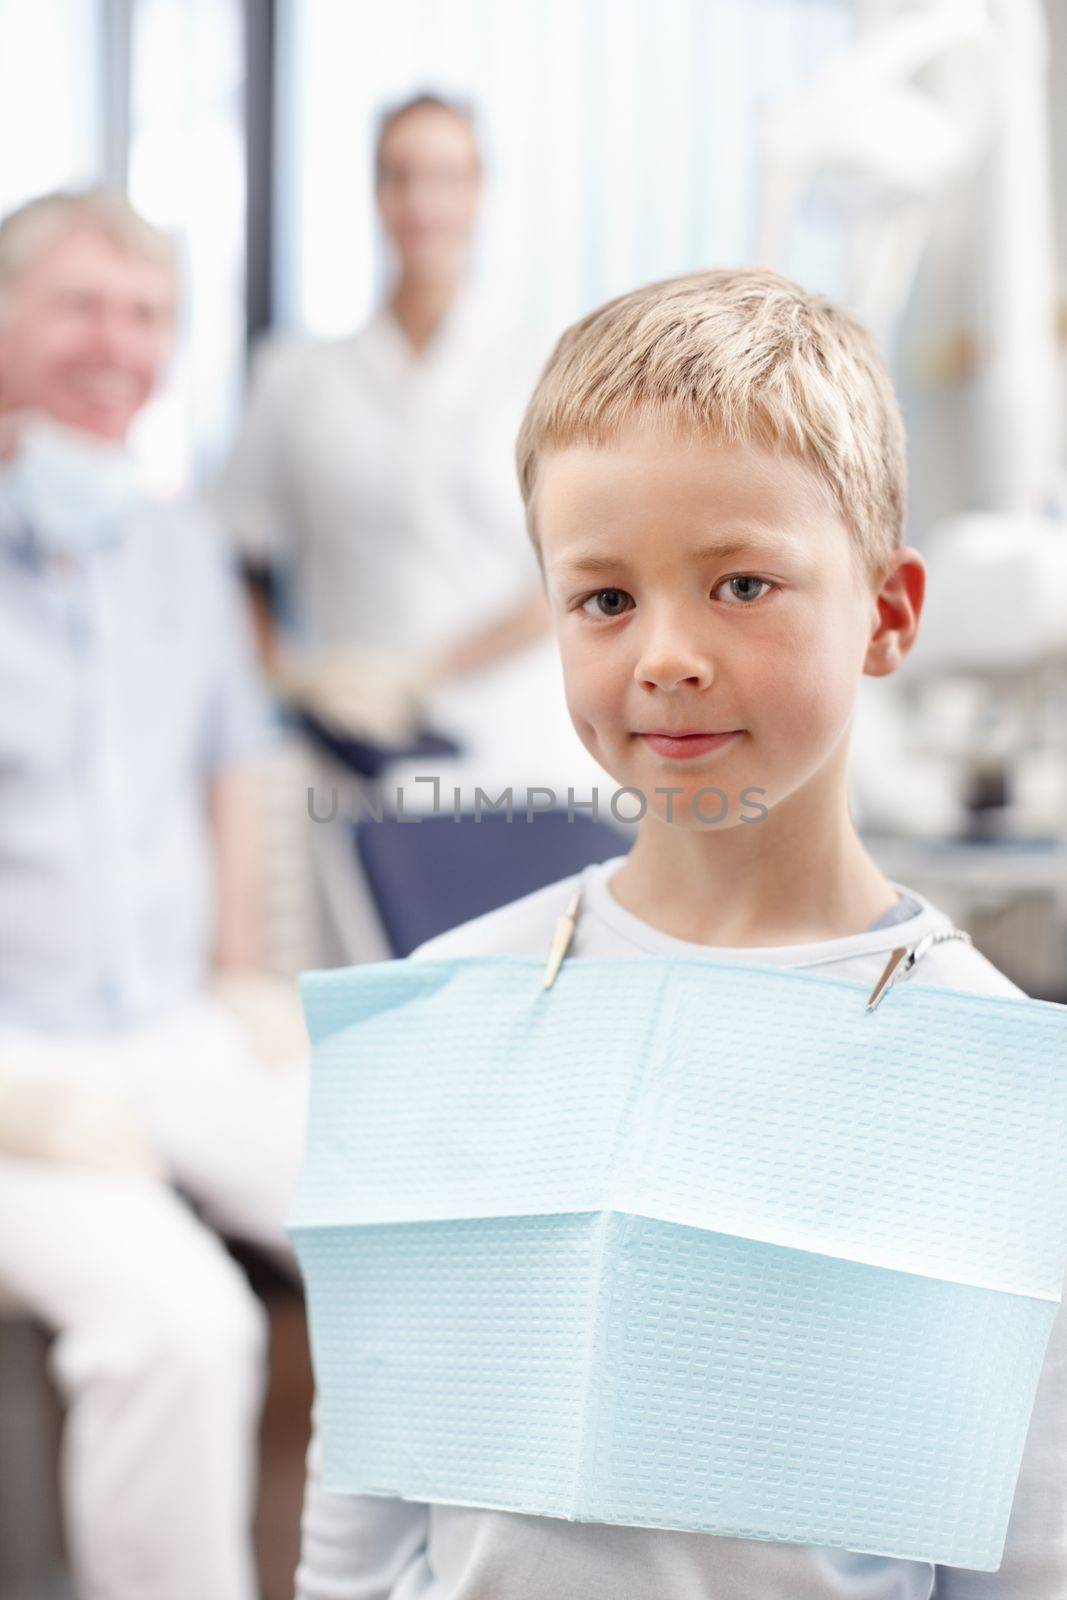 Smiling boy at dentists office. Portrait of cute young boy smiling with doctors in background